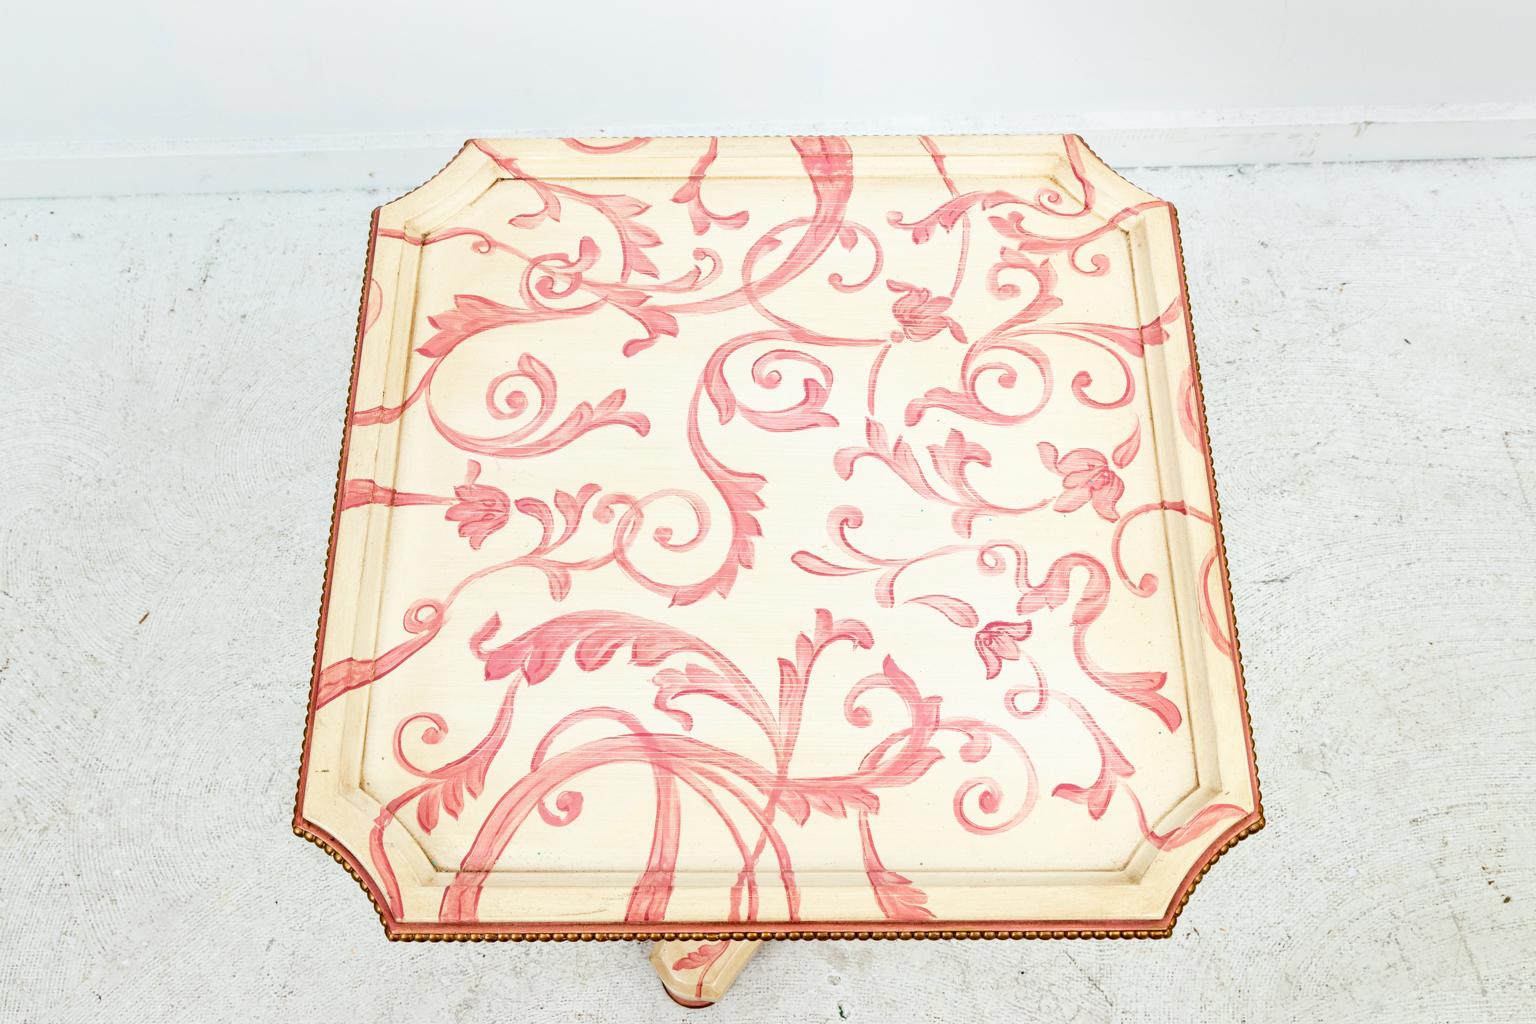 Wood Painted Side Table with Scrolled Foliage